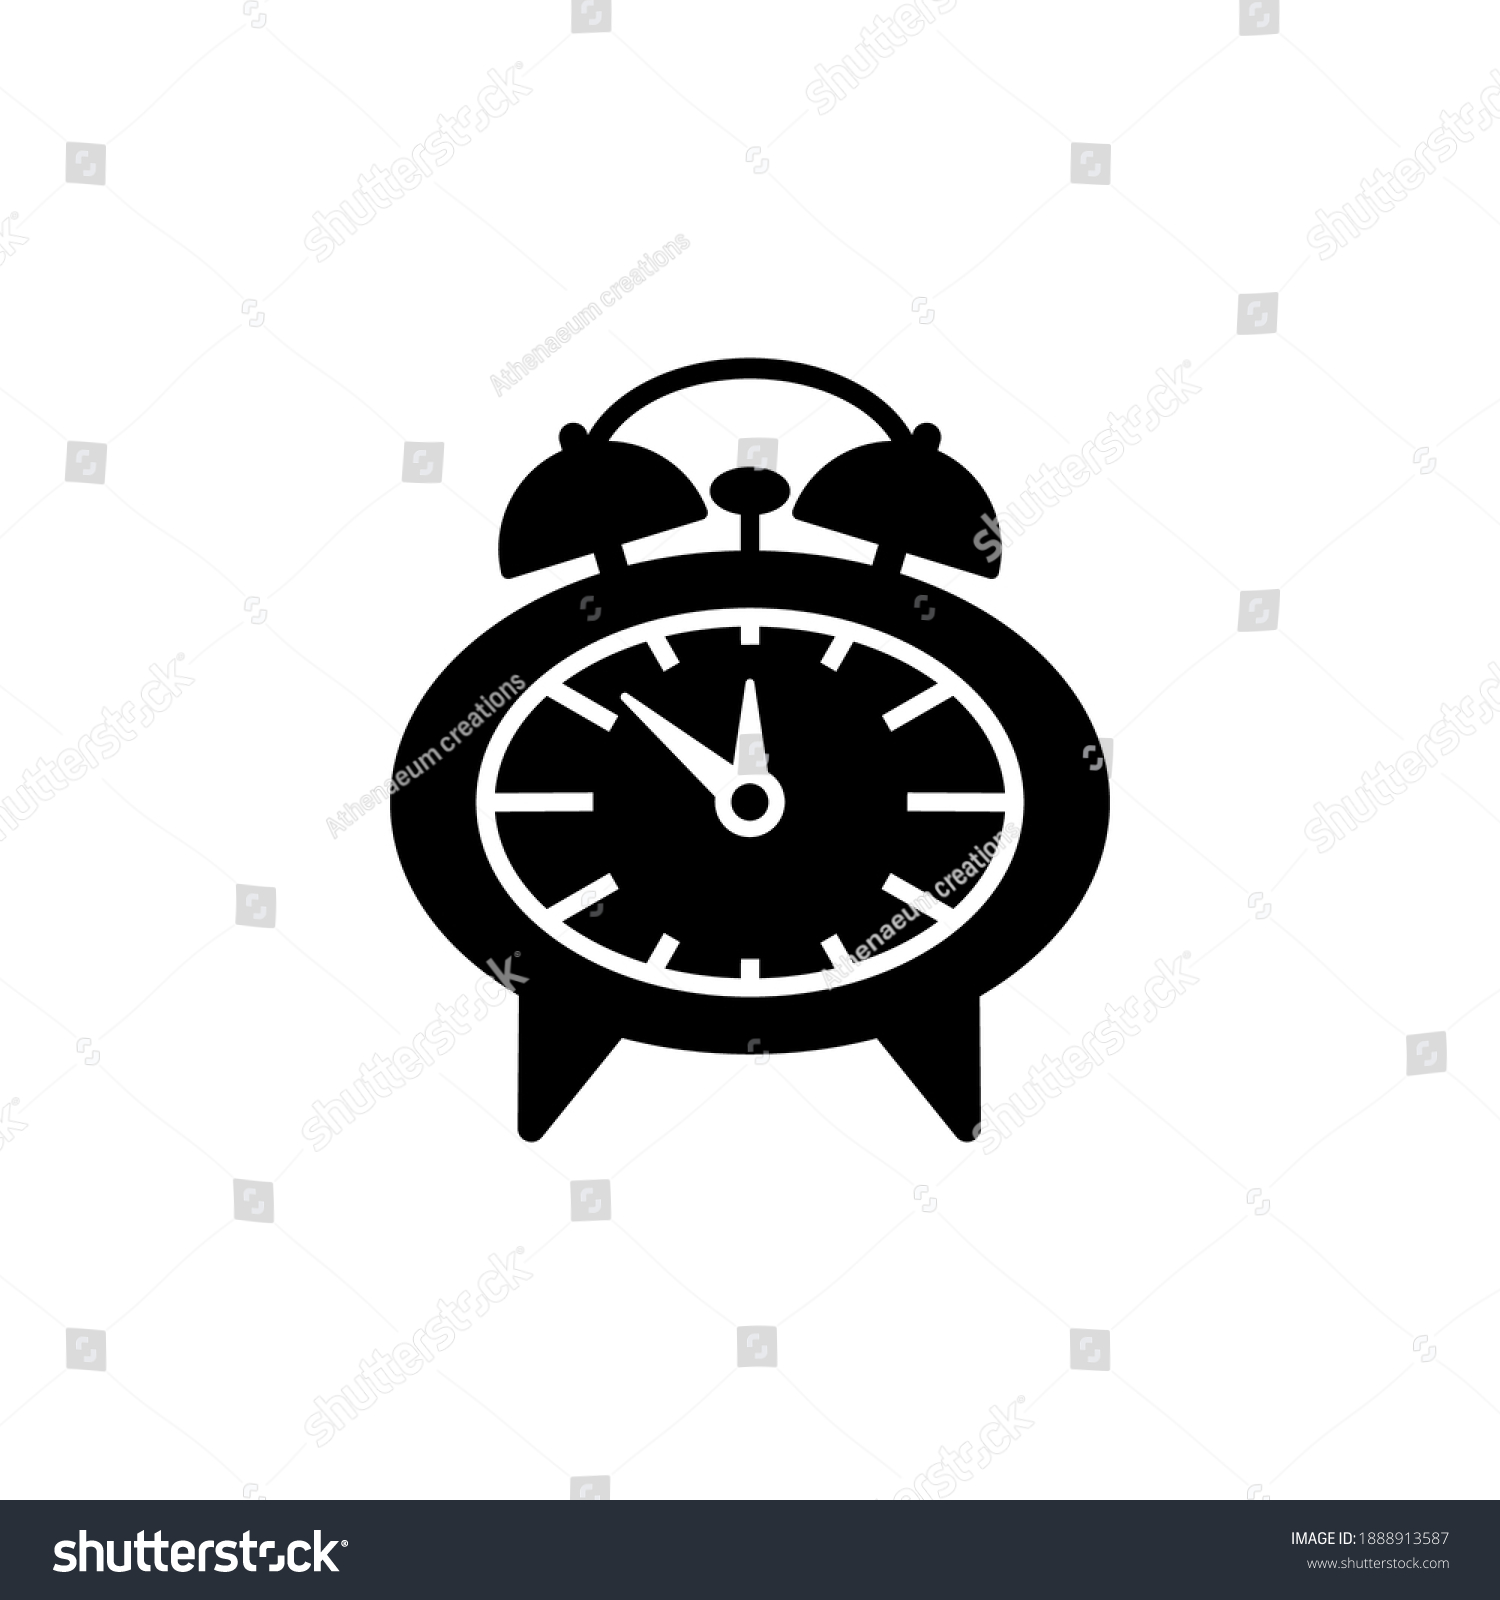 SVG of Clock icon. Birth Stats icon for Birth Announcement design. Baby Stats element. Hand drawn vector illustration for decorating albums, metrics, posters and invitation cards for baby. svg